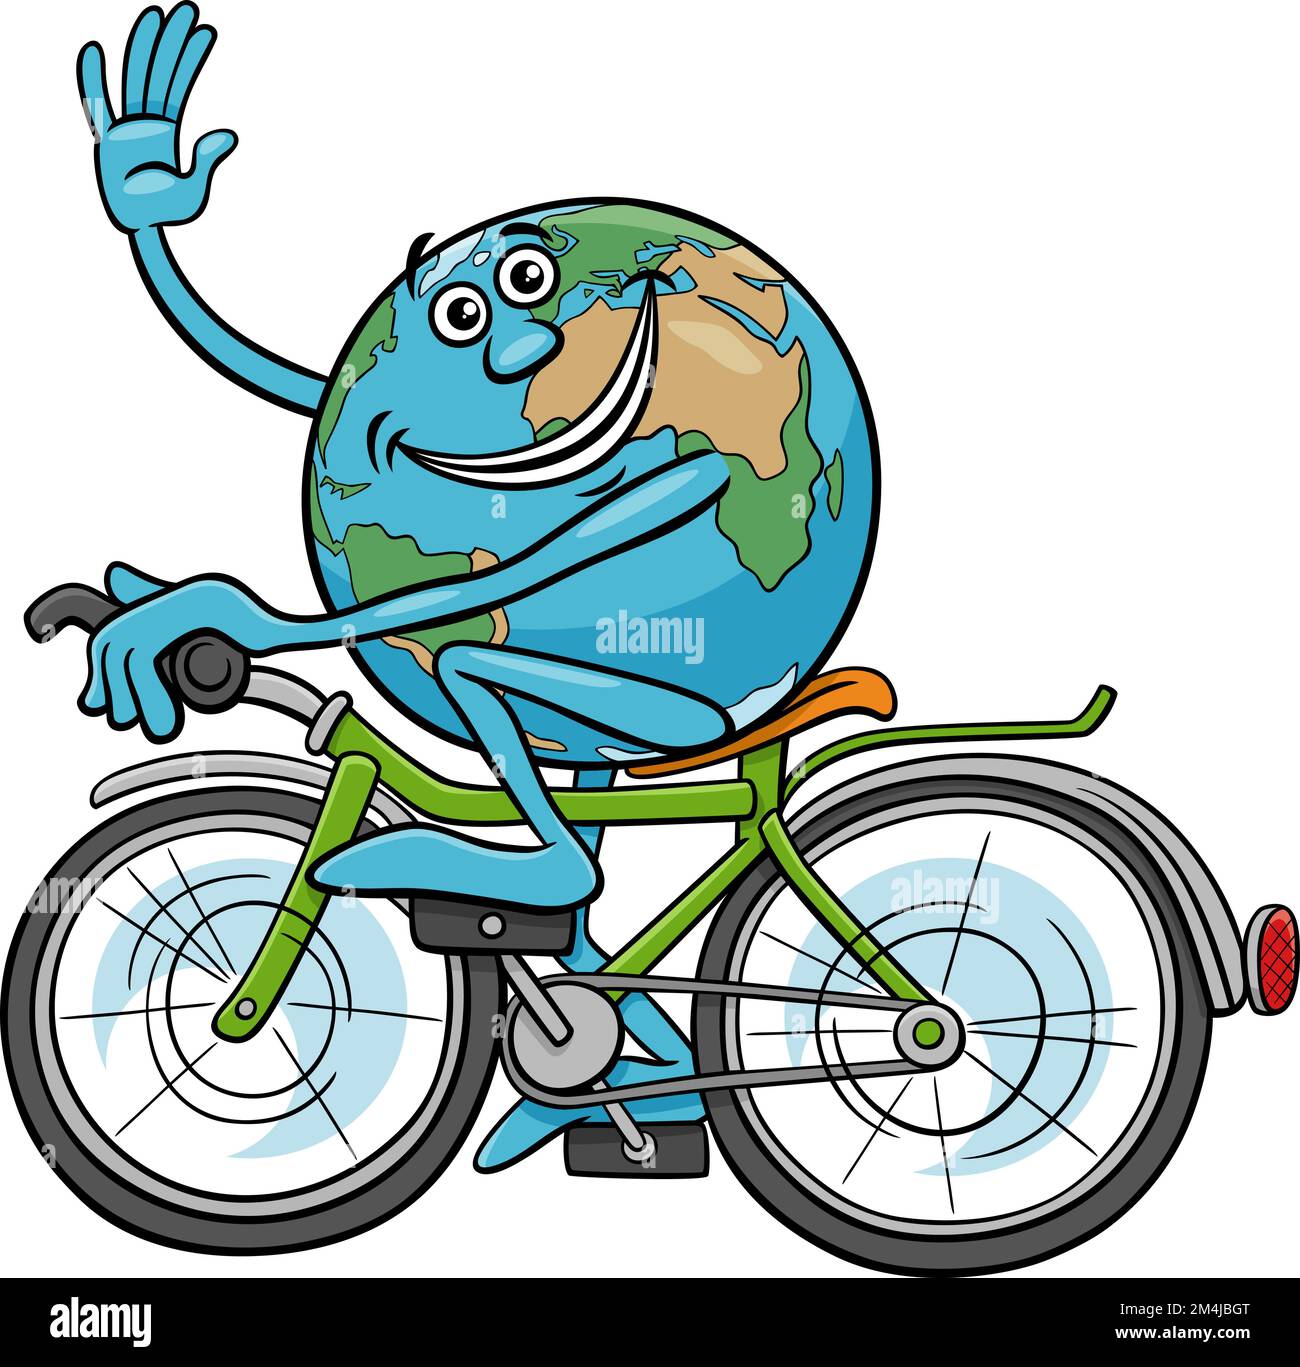 Cartoon illustration of Earth character riding a bicycle Stock Vector